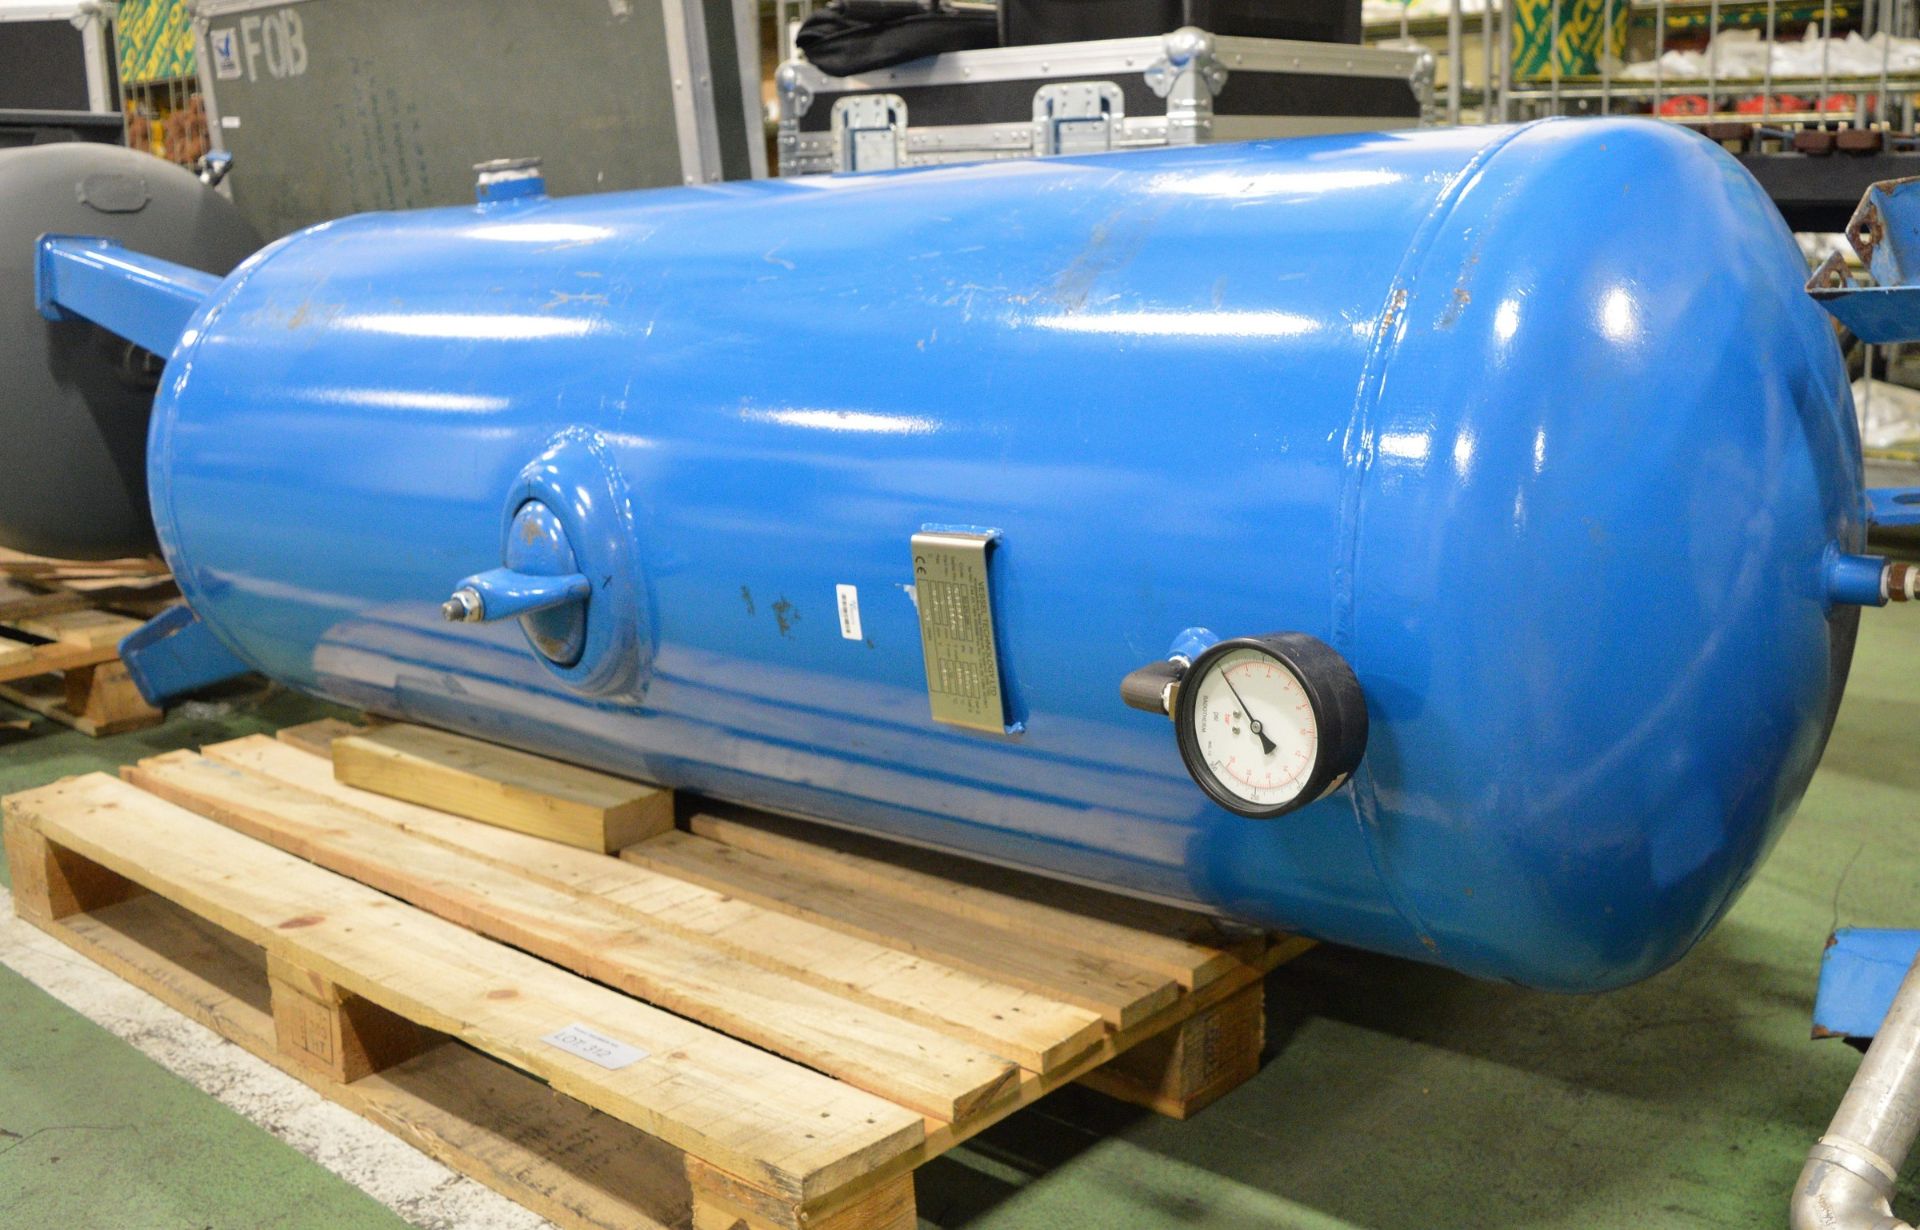 Vessel Technology Air Compressor Receiver Tank - Image 2 of 4